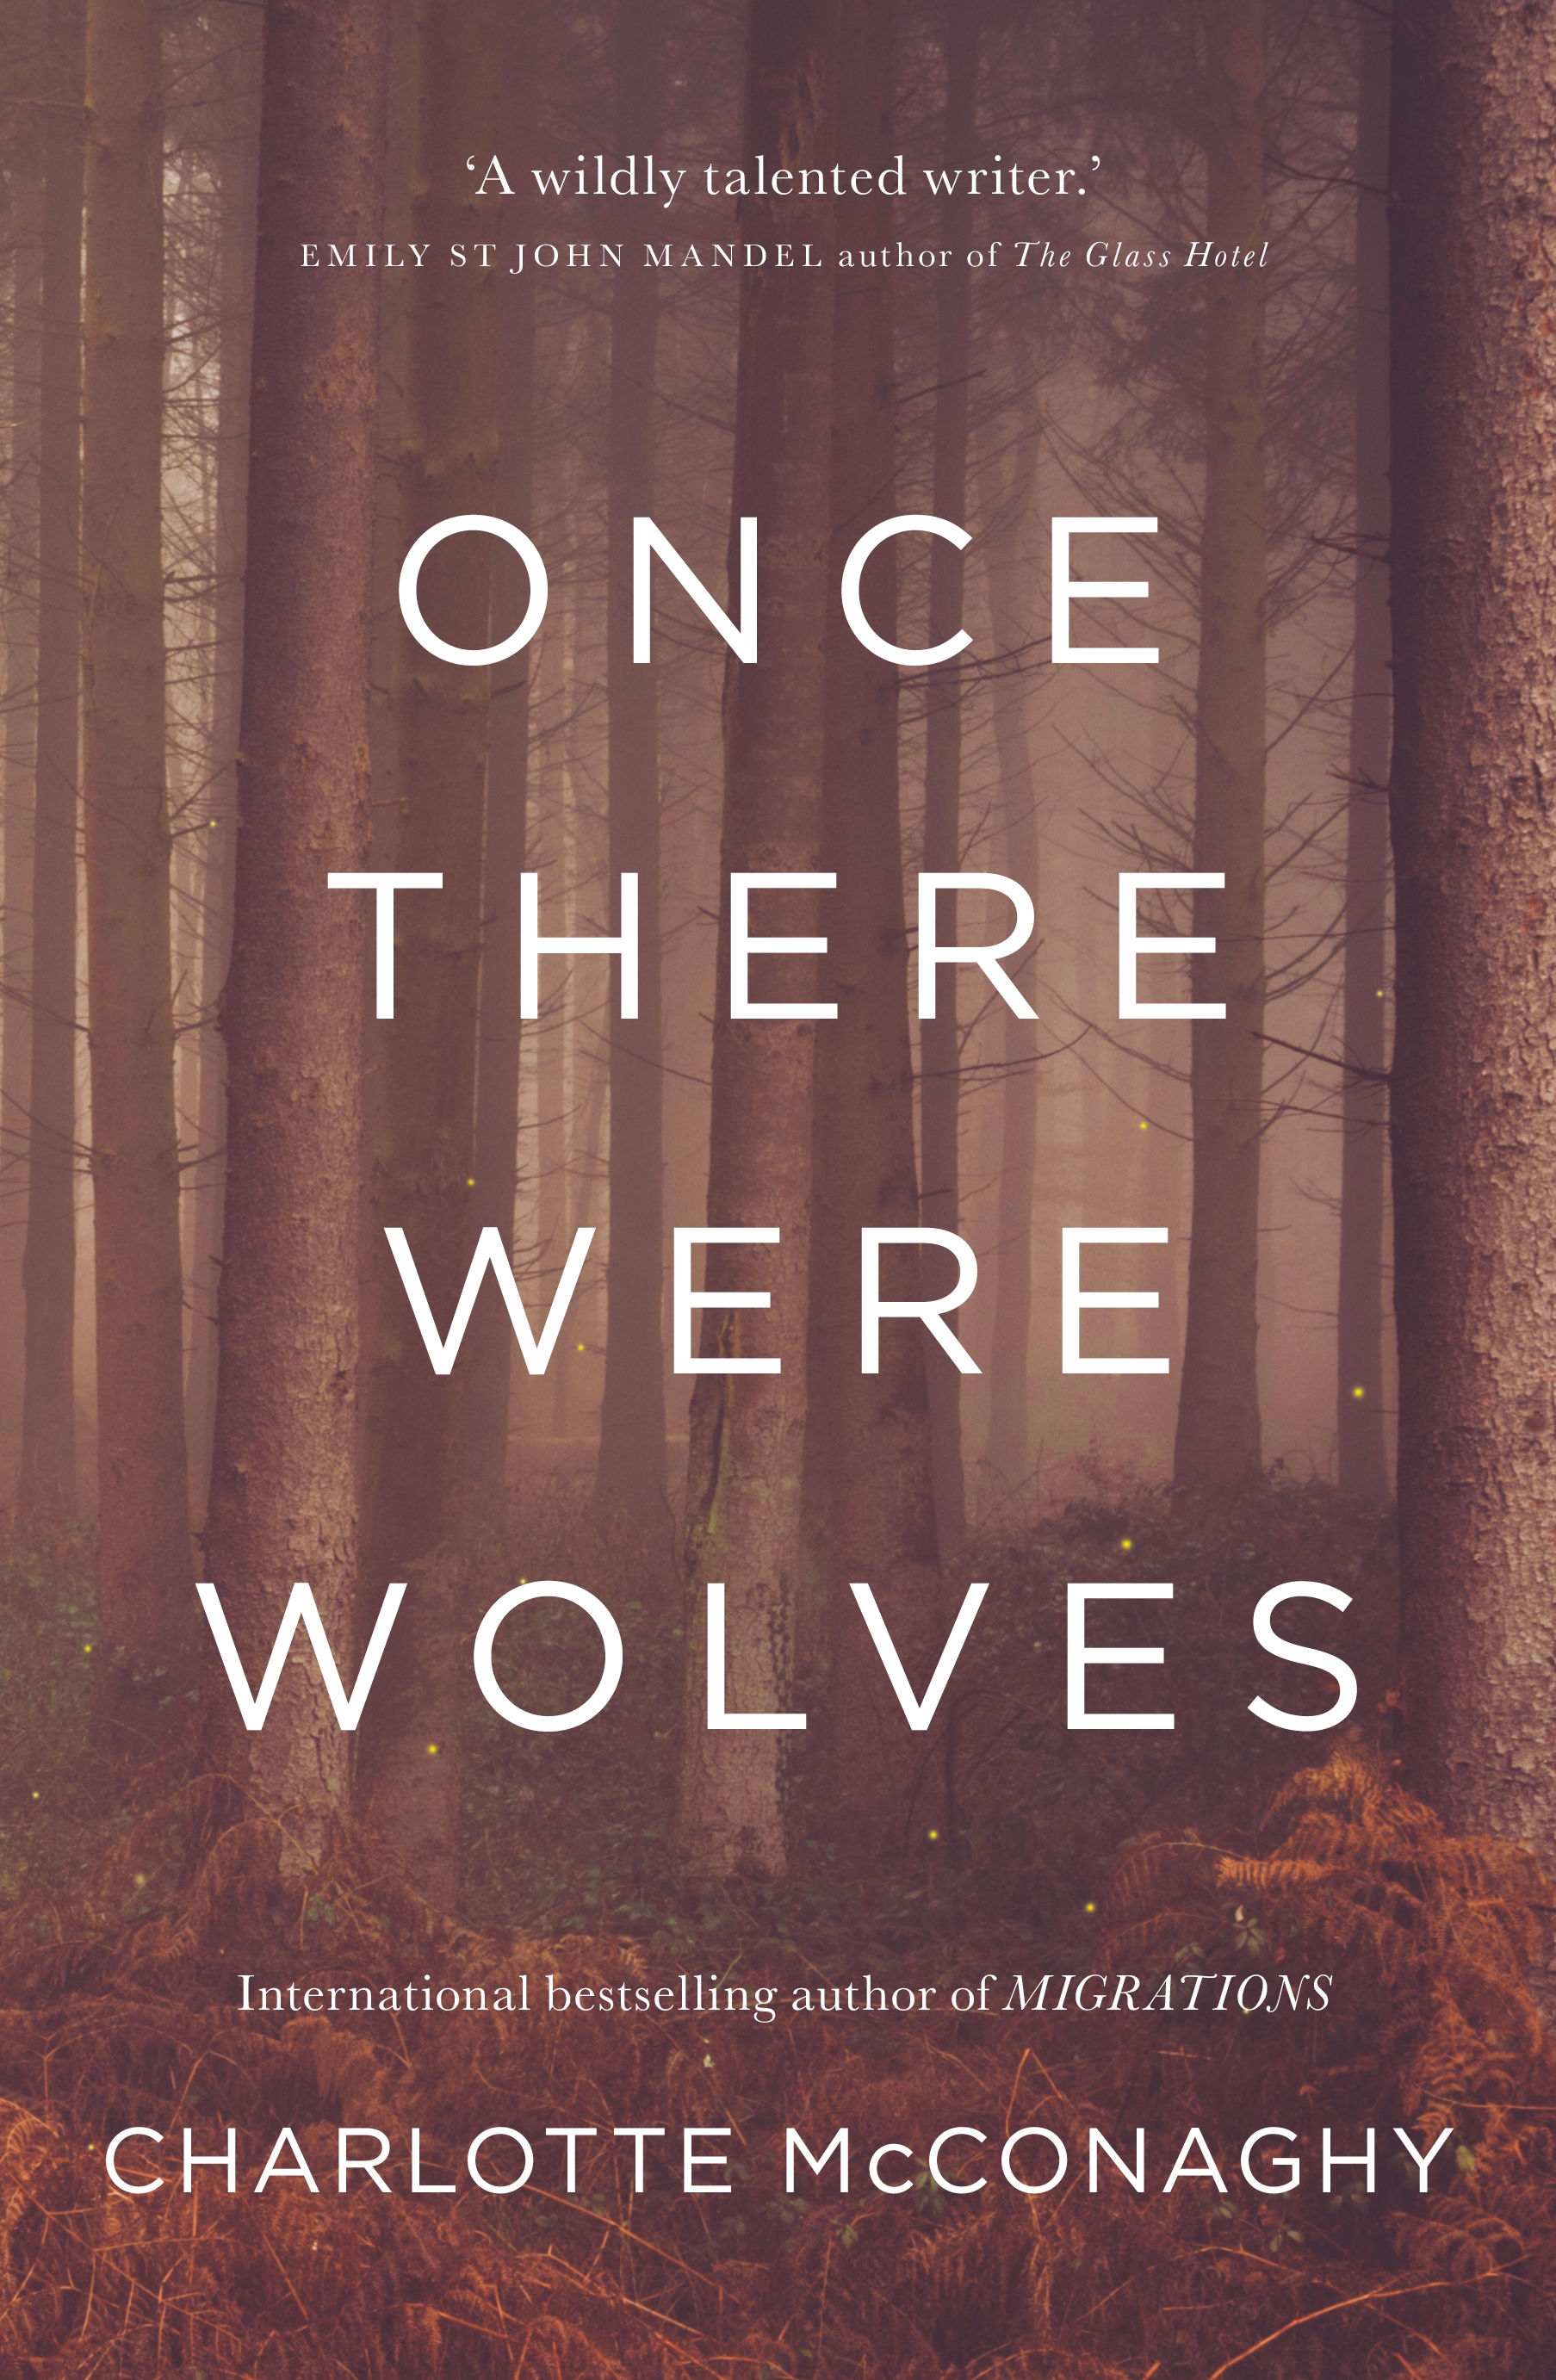 Graphic image of the book cover of Once There Were Wolves